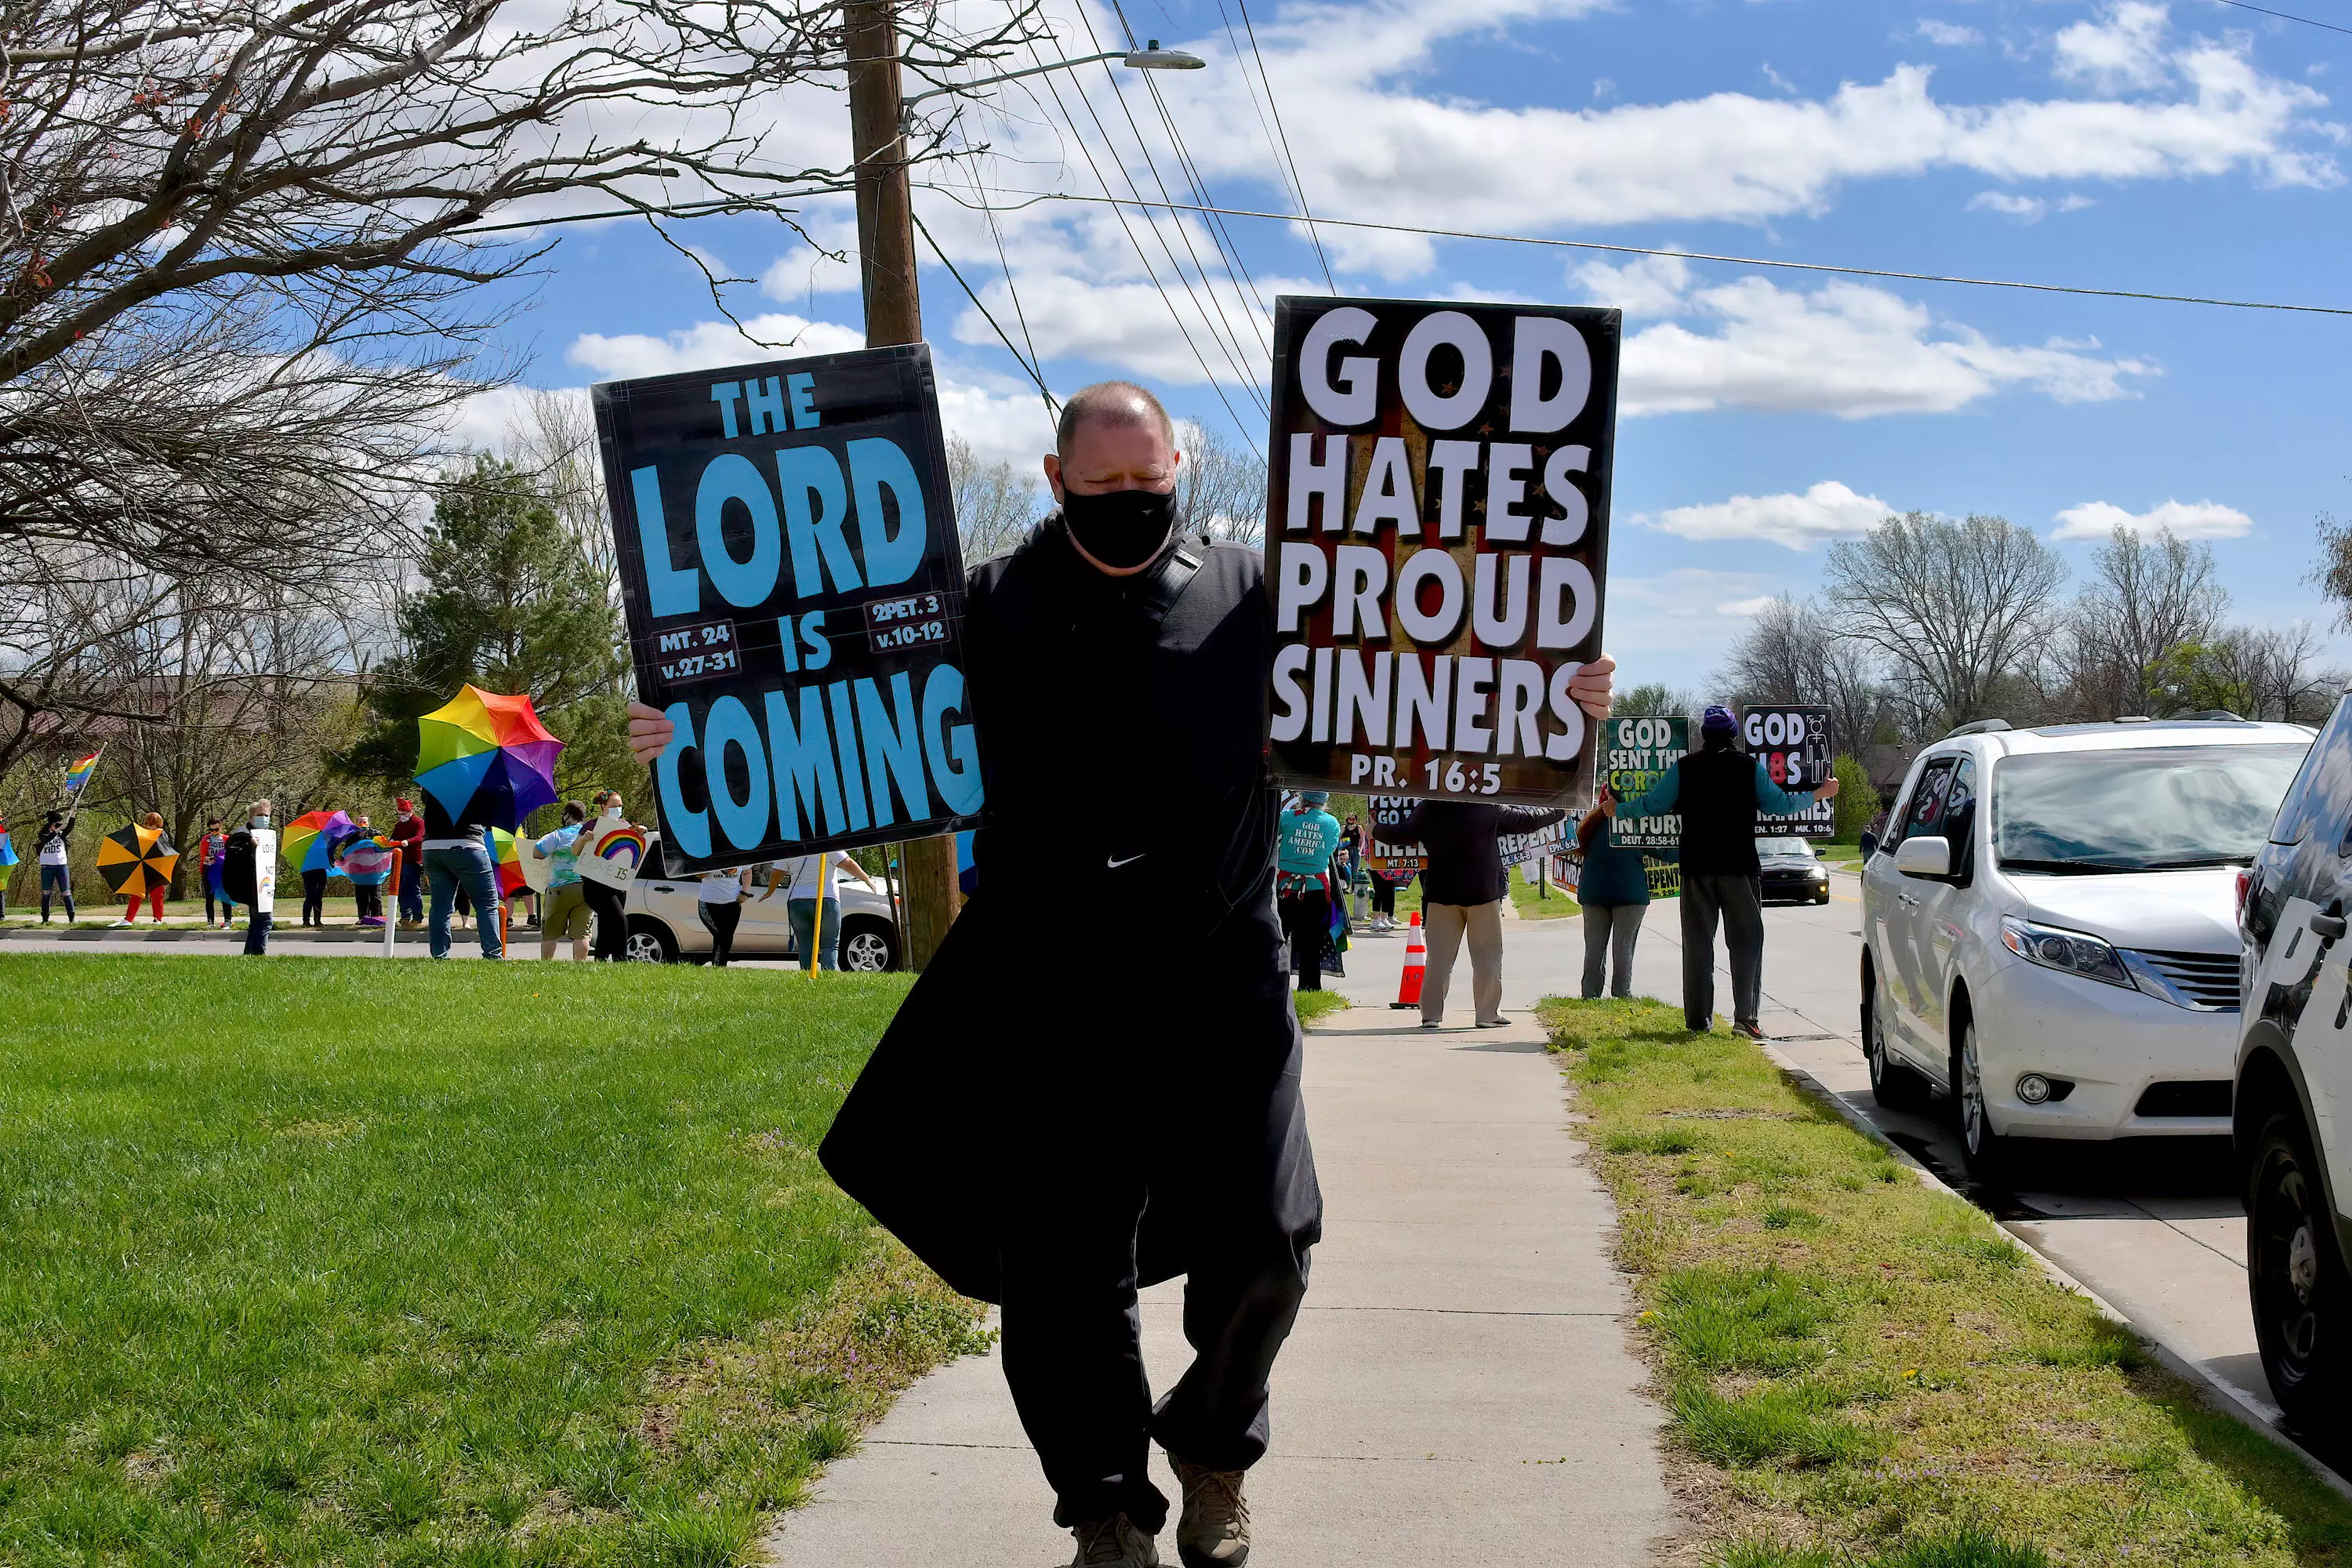 Members of the Westboro Baptist Church display their well known hate signs.